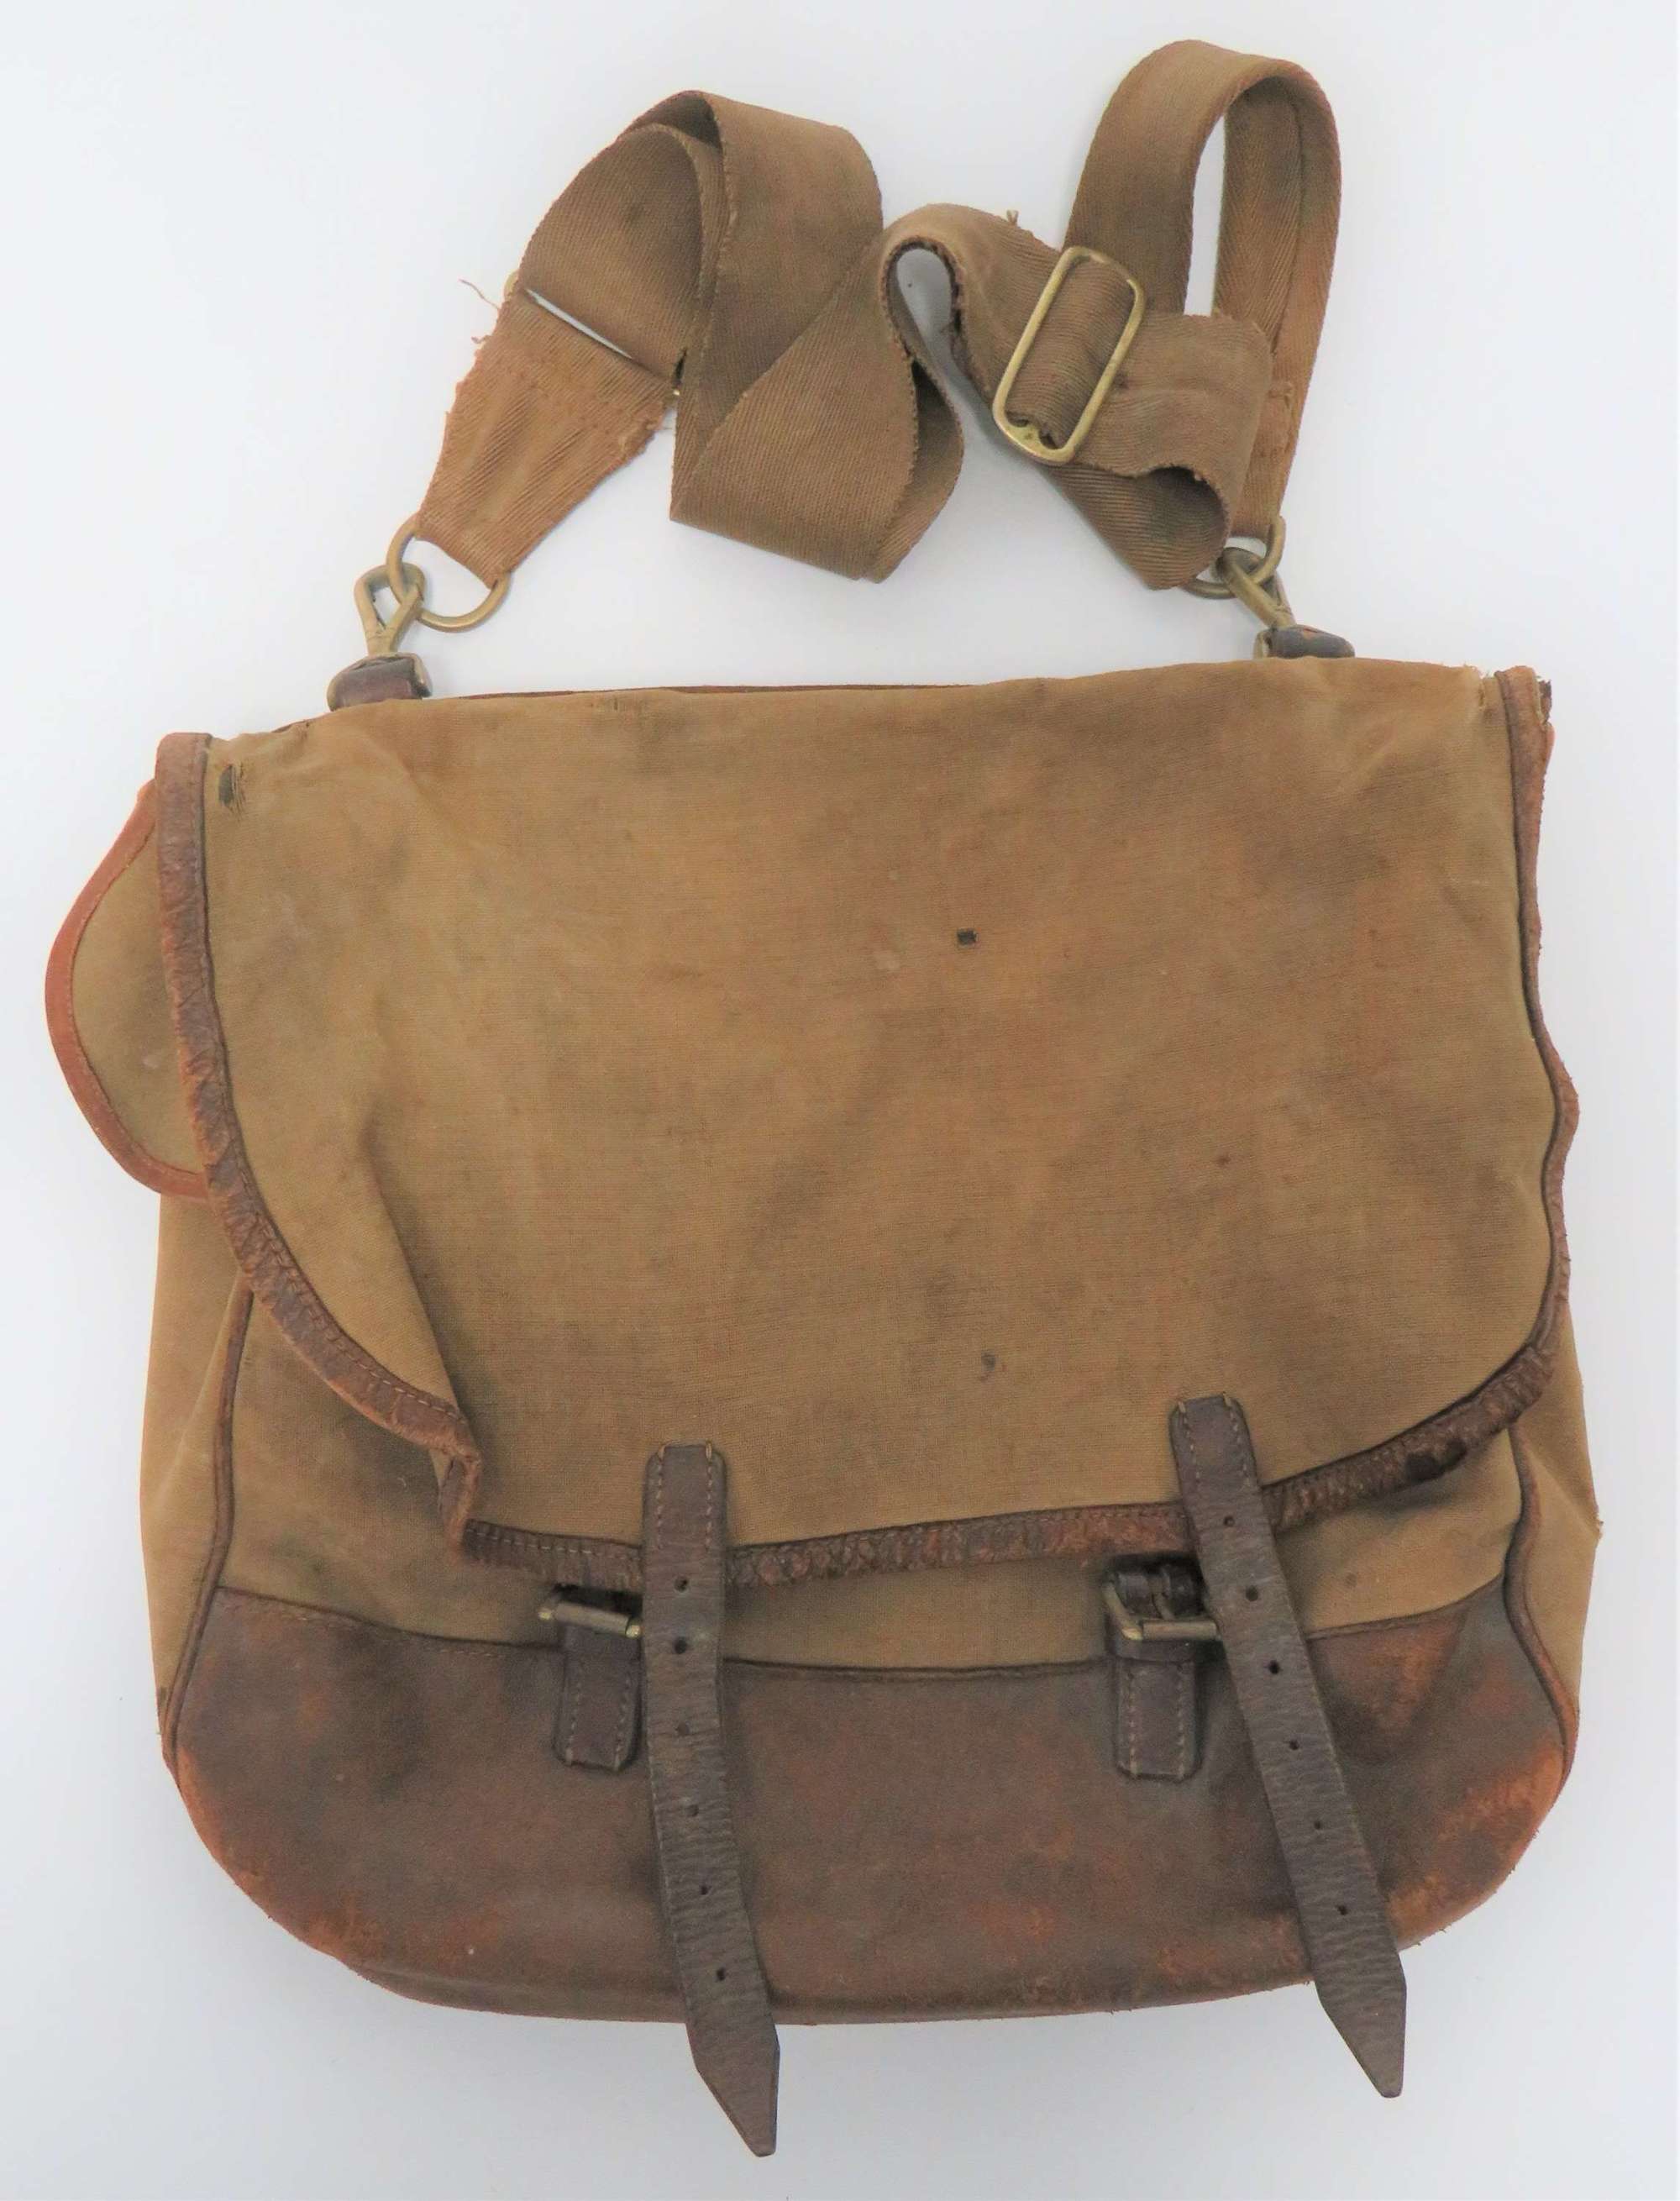 Attributed WW1 Casualty's Private Purchase Officers Side Bag